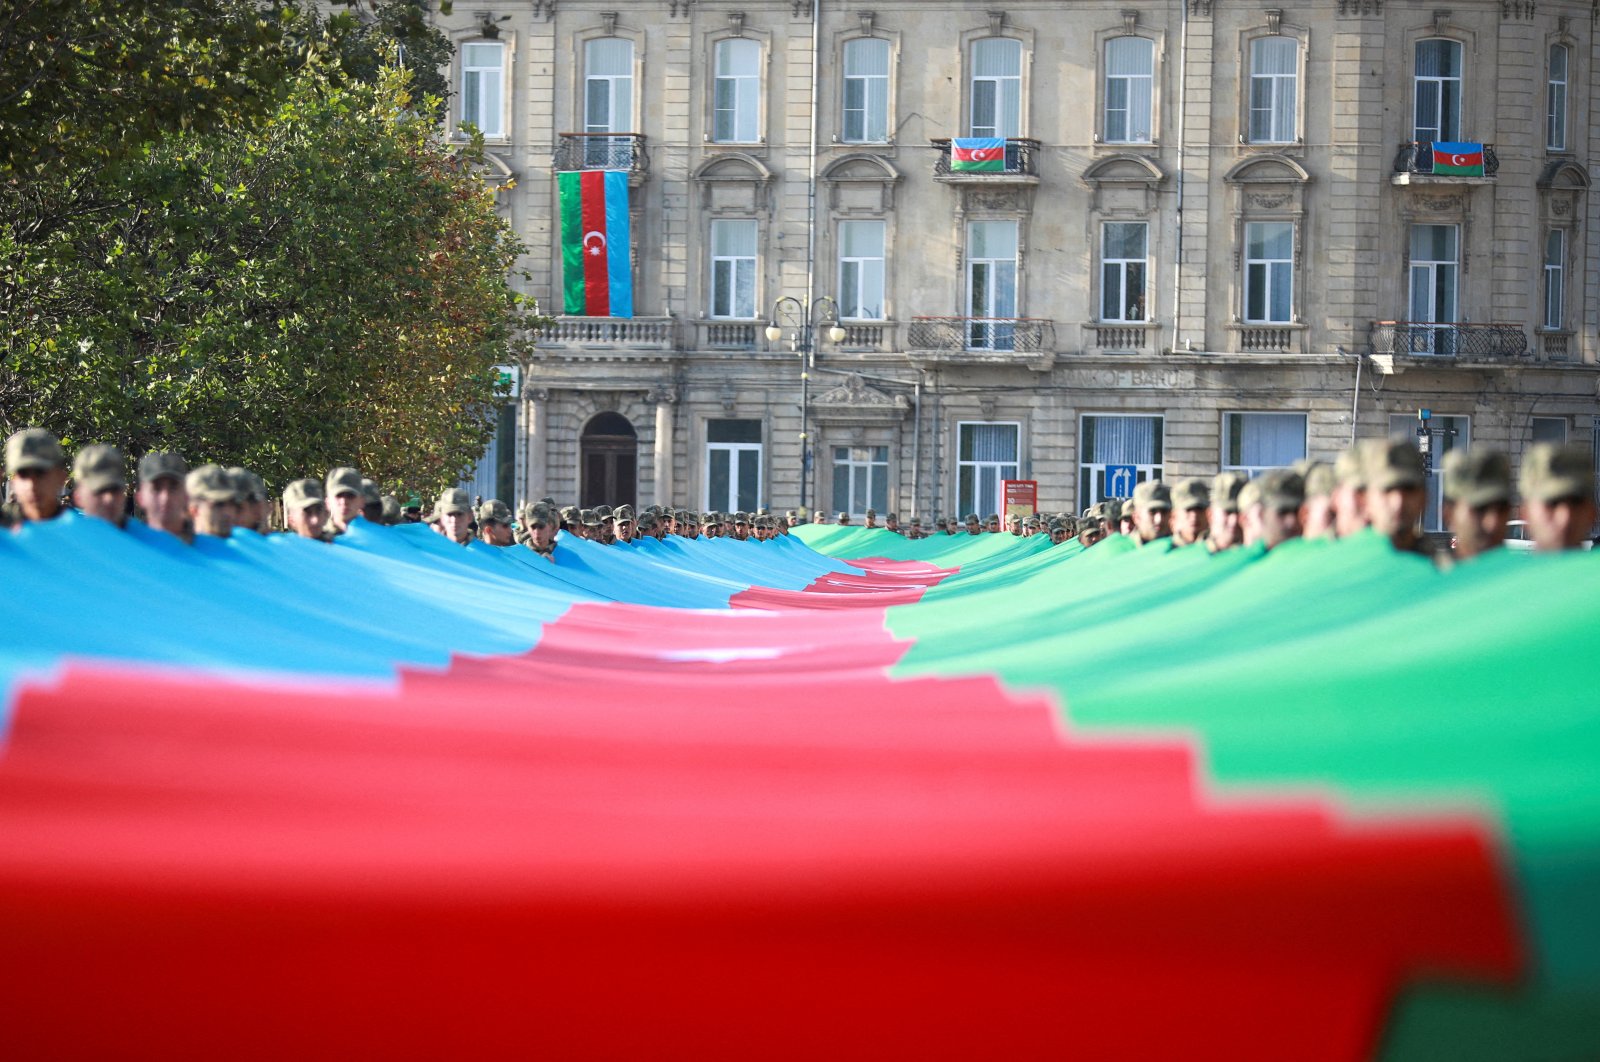 Azerbaijani troops carry a giant flag during a procession marking the anniversary of the end of the 2020 war over Karabakh, in Baku, Azerbaijan, Nov. 8, 2021. (REUTERS Photo)